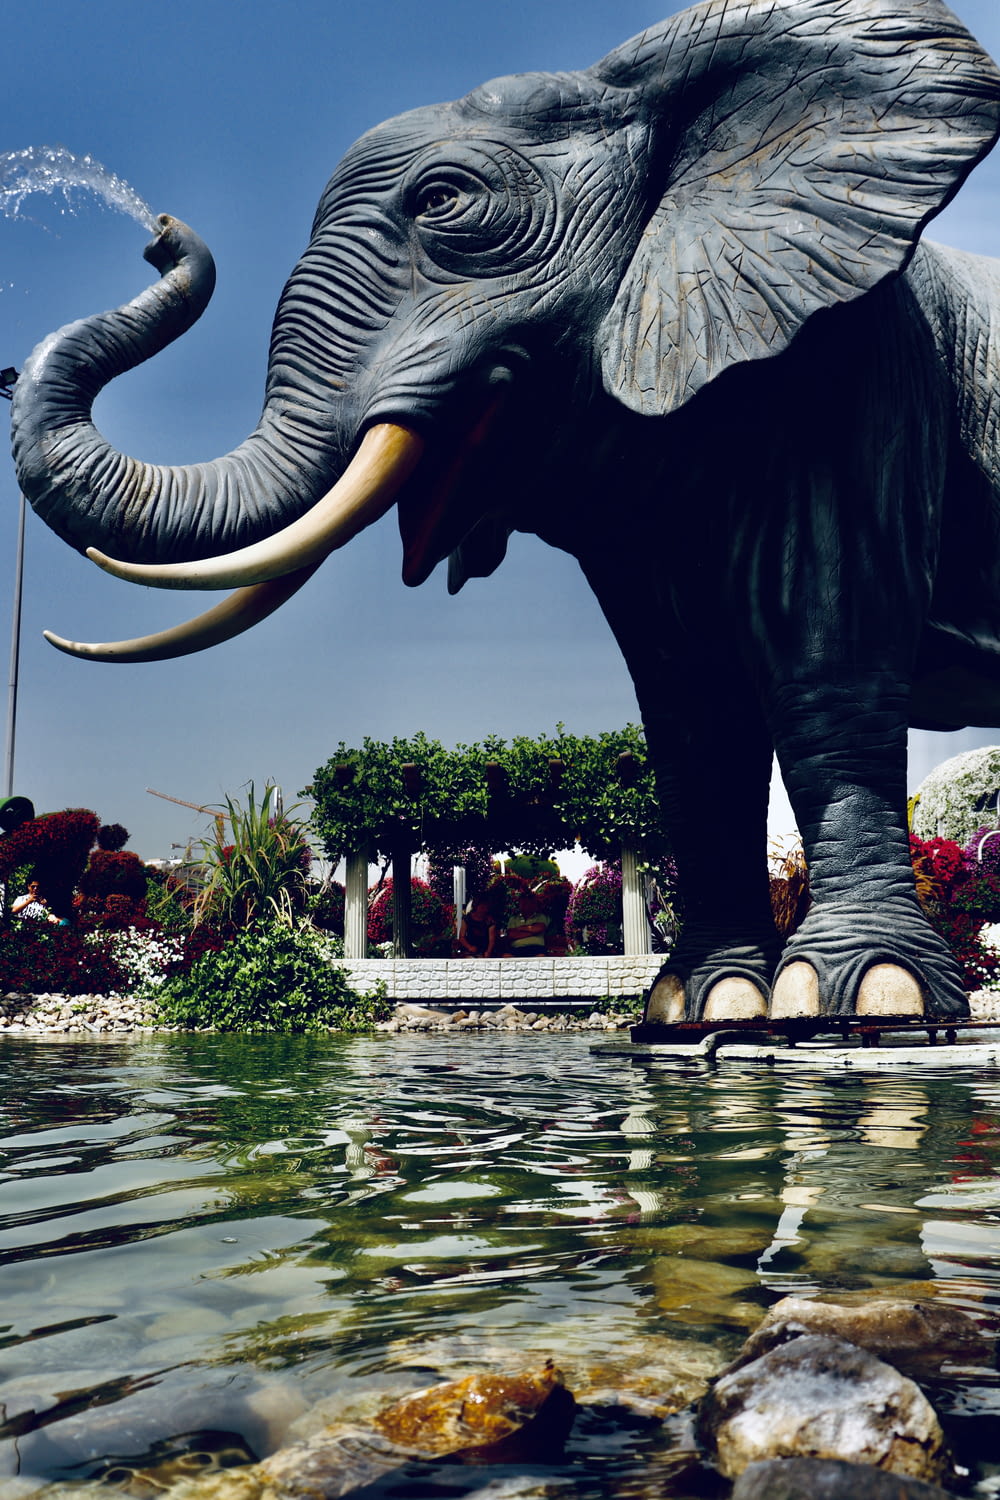 elephant statue on water near flowers and trees during daytime